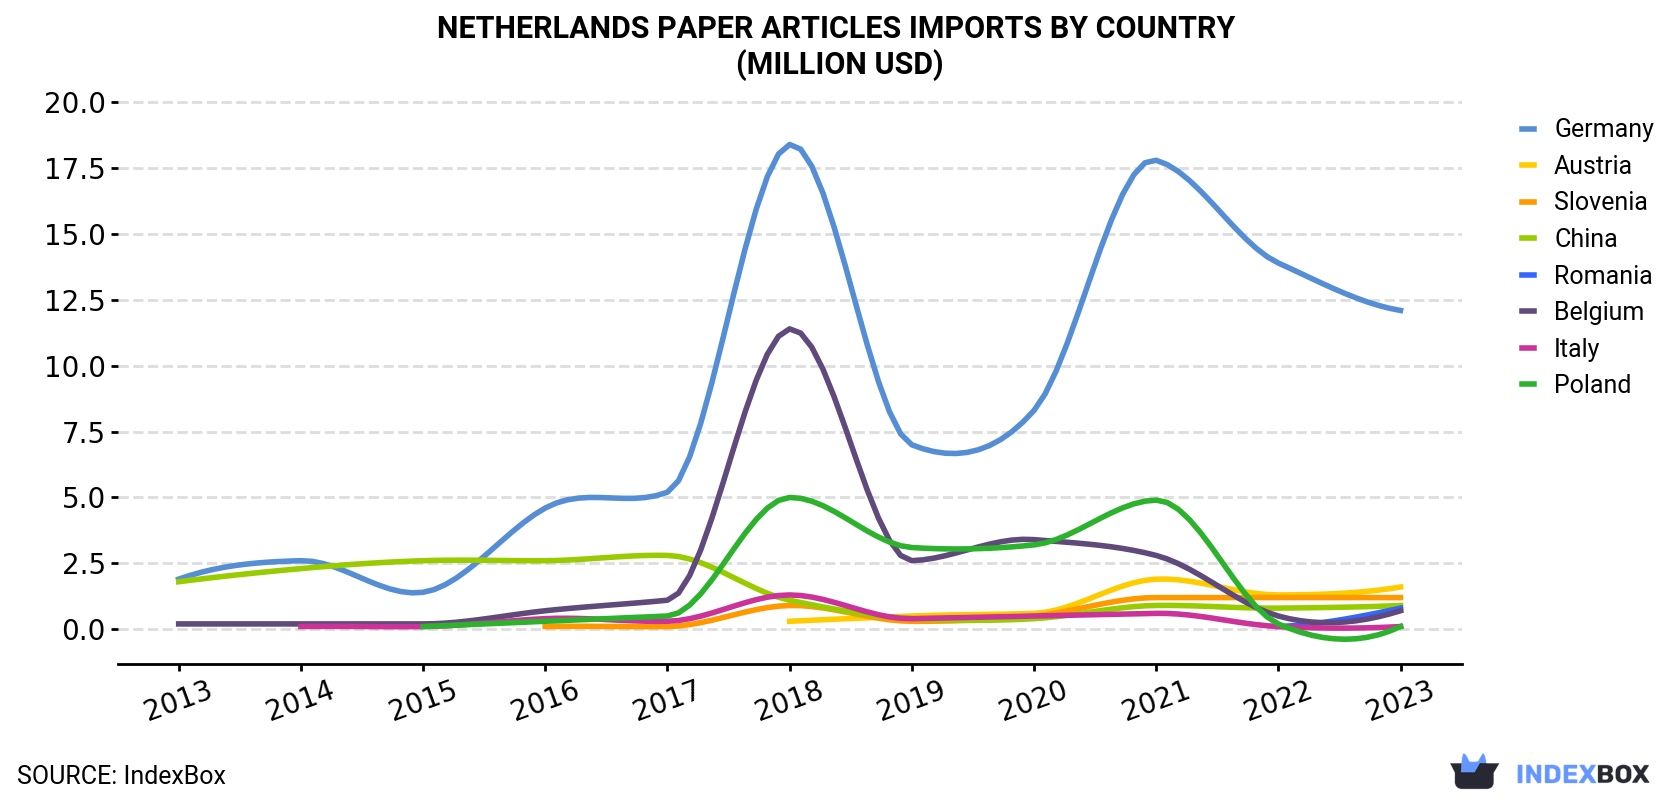 Netherlands Paper Articles Imports By Country (Million USD)